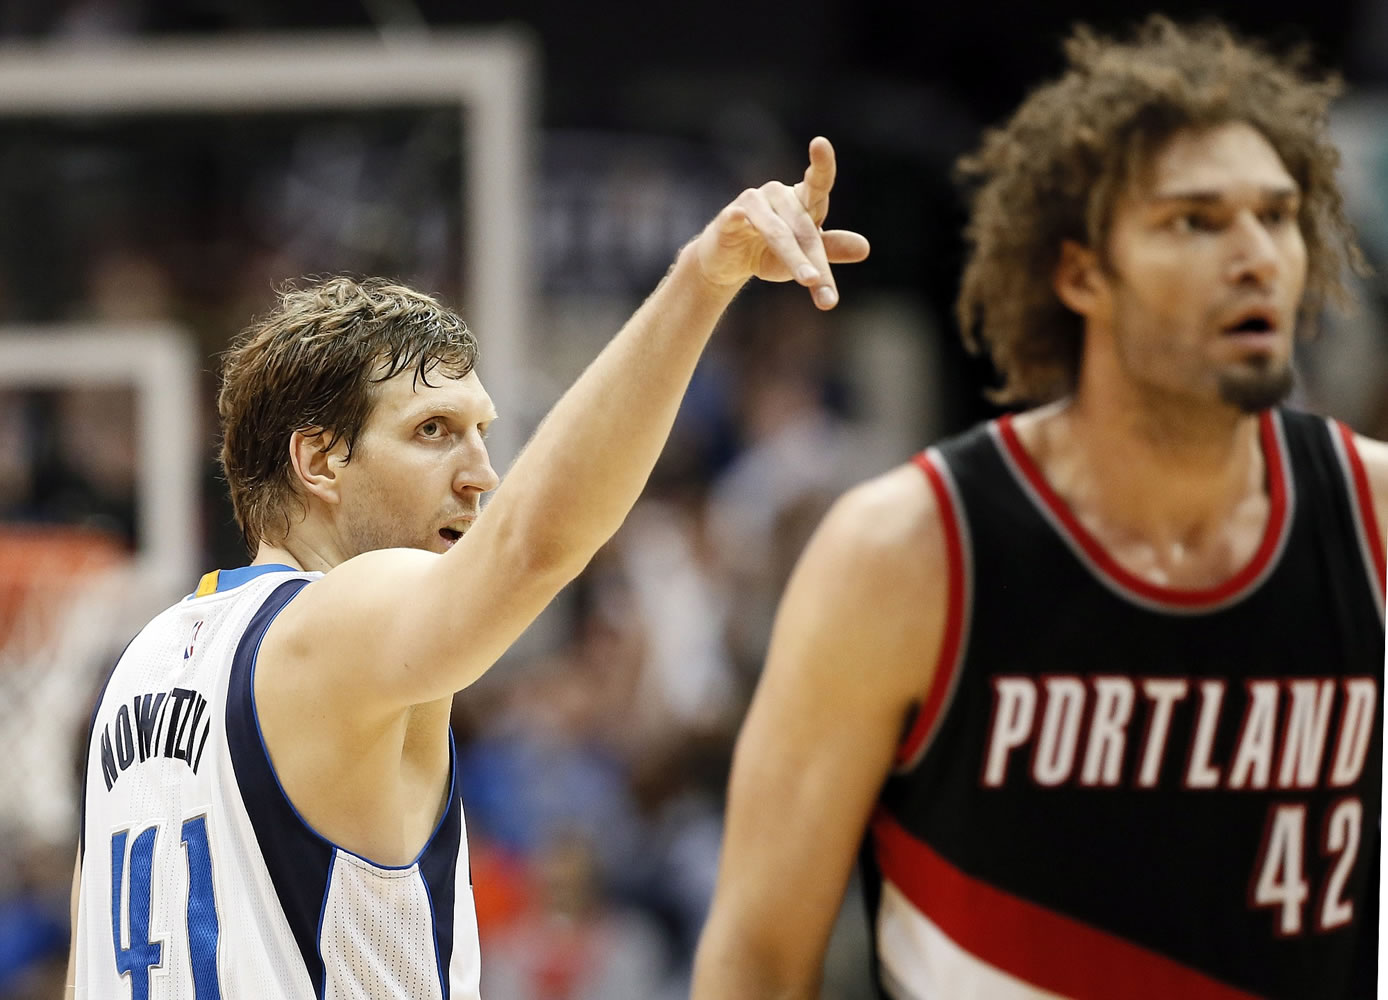 Dallas Mavericks forward Dirk Nowitzki (41), of Germany, points to the seats as Portland Trail Blazers' Robin Lopez (42) walks back to the bench after Nowitzki tied the game with a 3-point basket at the end of regulation Saturday, Feb. 7, 2015, in Dallas. The Mavericks won in overtime 111-101.